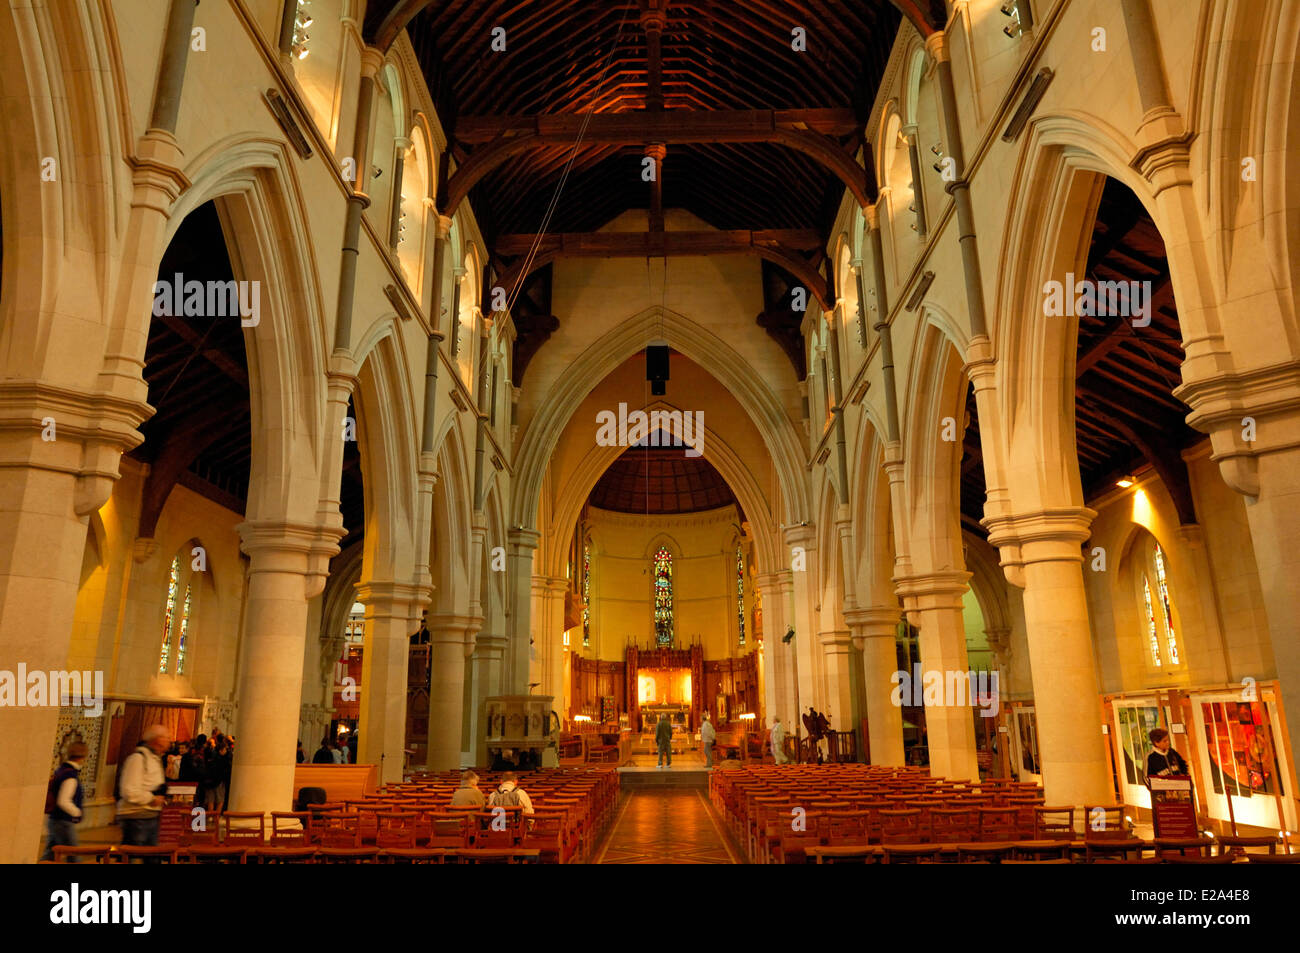 New Zealand, South Island, Region of Canterbury, Christchurch, central nave of the cathedral Stock Photo